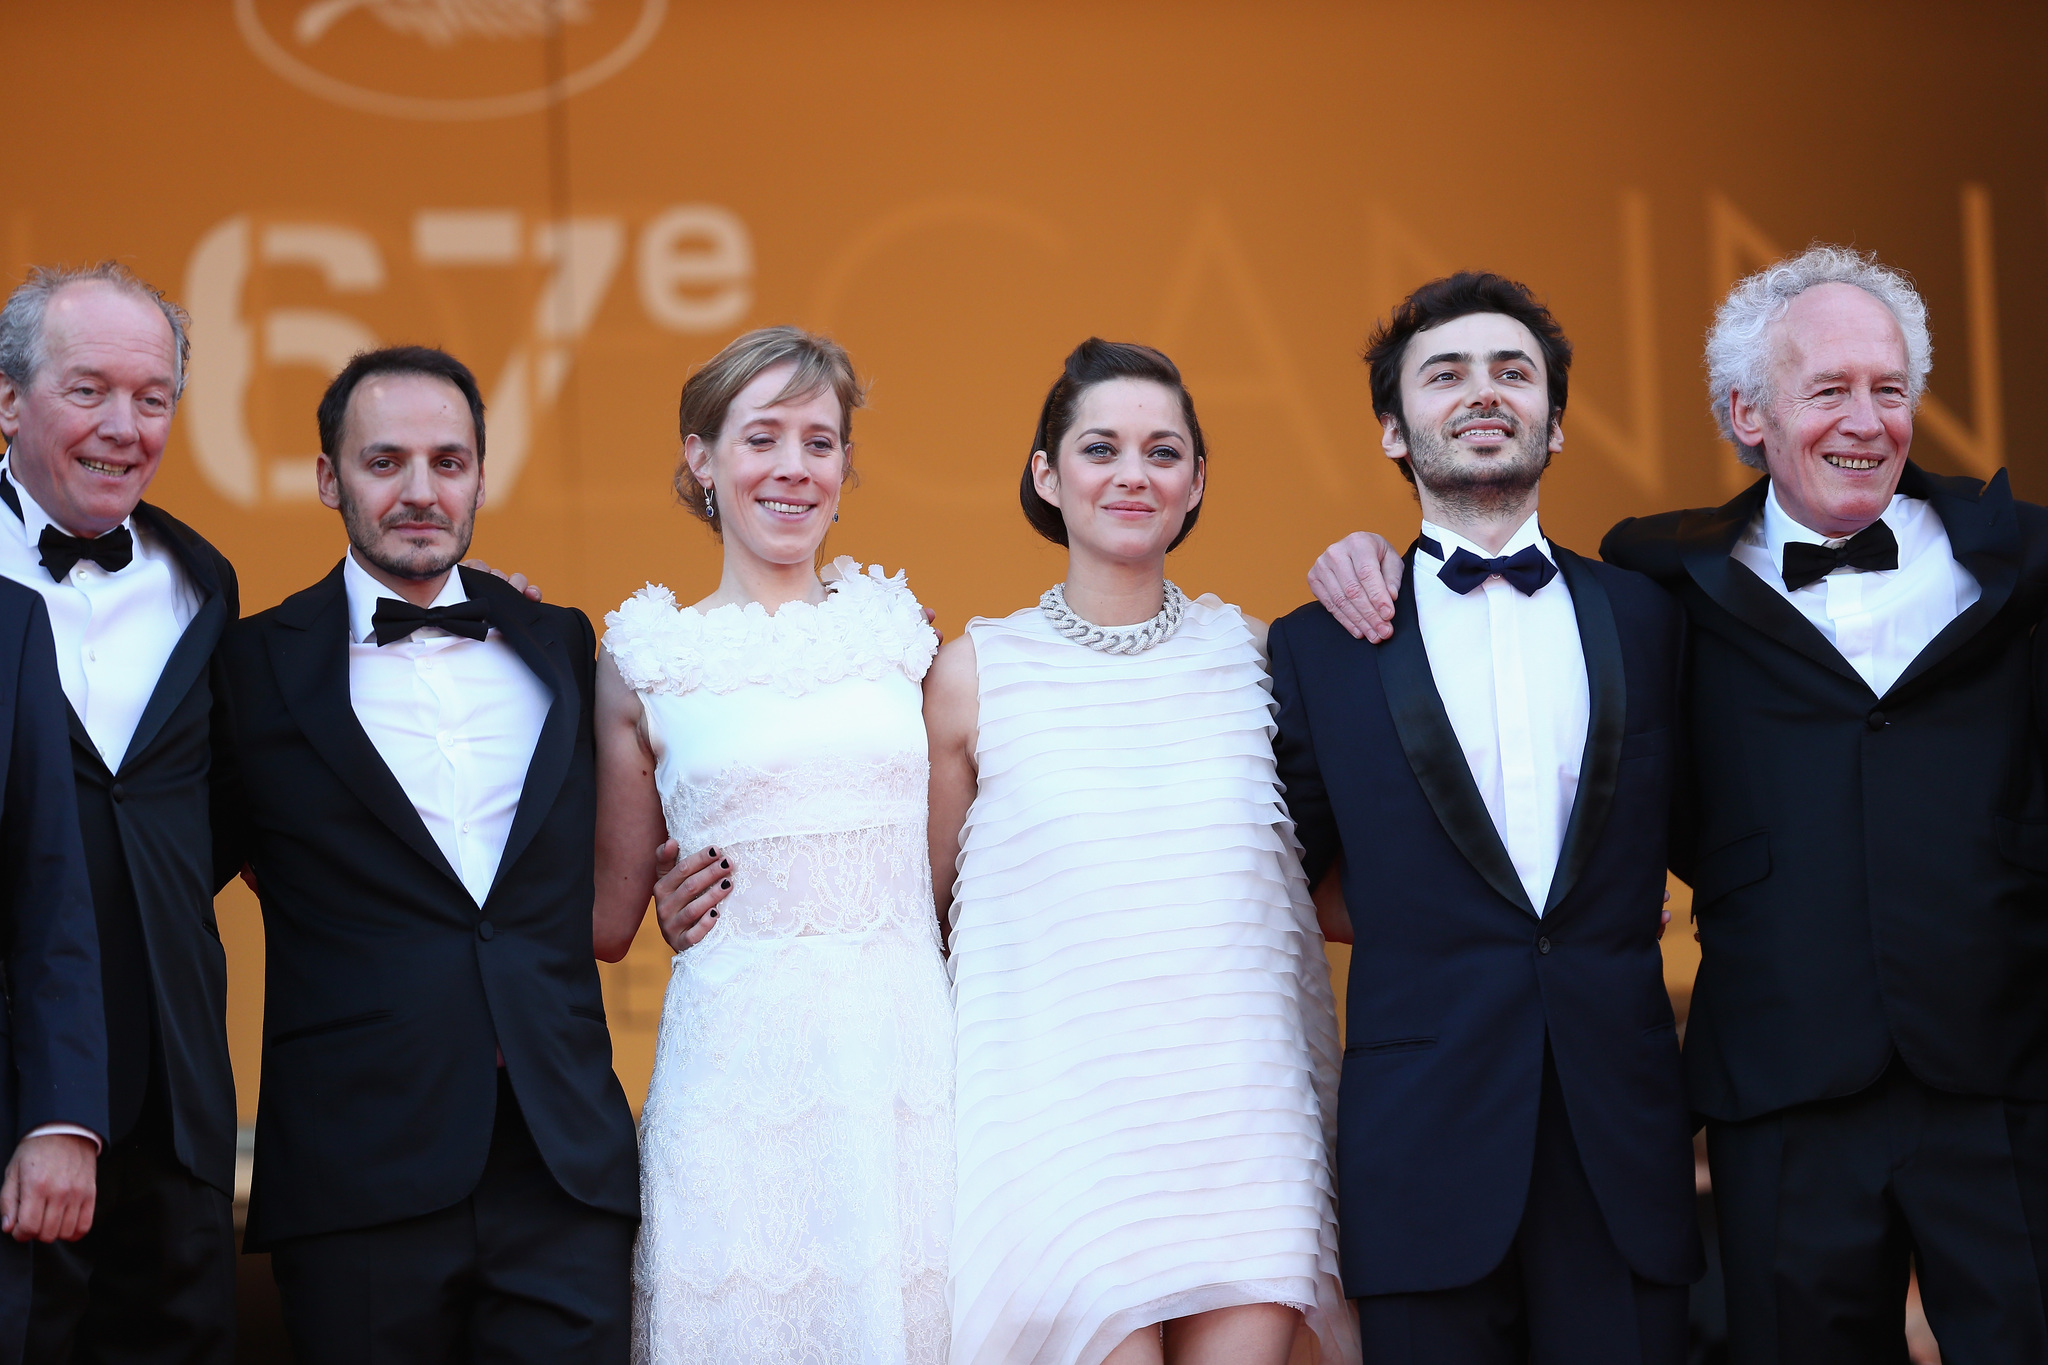 Marion Cotillard, Jean-Pierre Dardenne, Luc Dardenne, Fabrizio Rongione, Christelle Cornil and Timur Magomedgadzhiev at event of Deux jours, une nuit (2014)